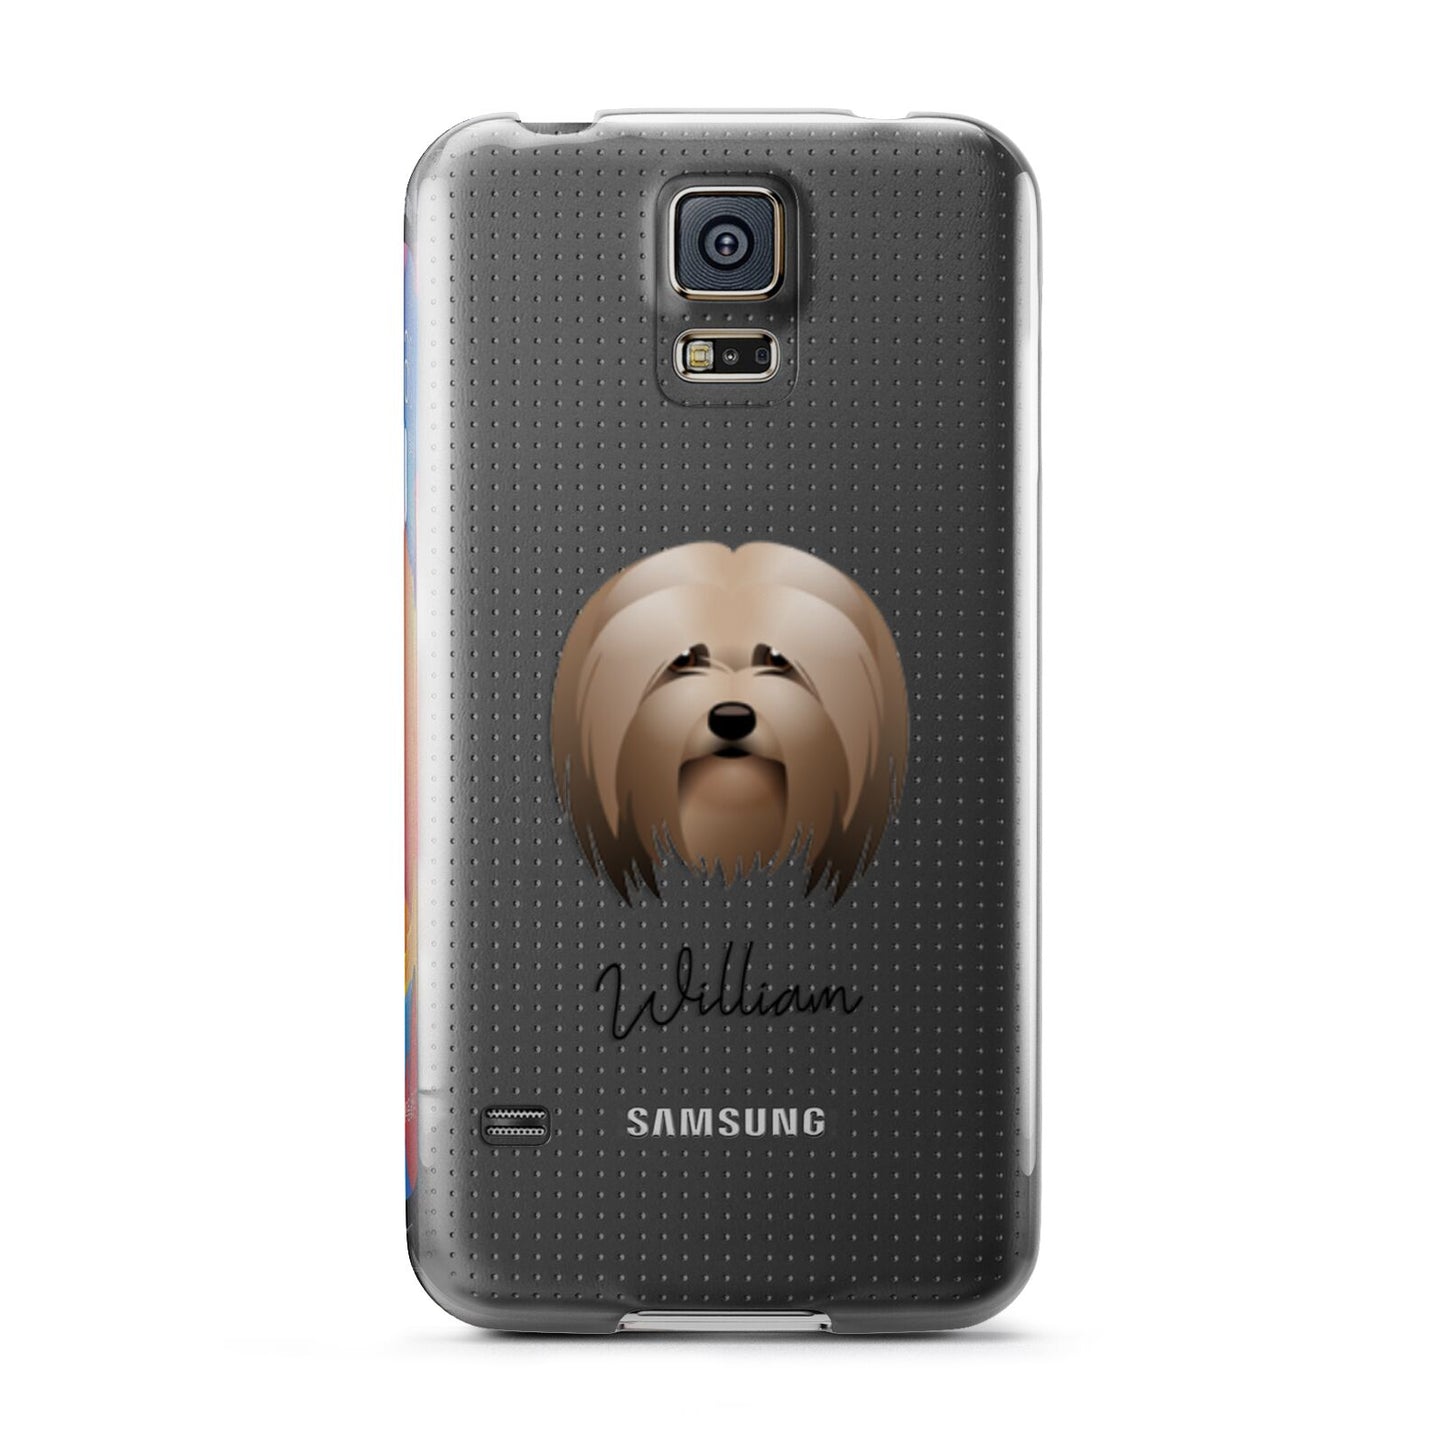 Lhasa Apso Personalised Samsung Galaxy S5 Case